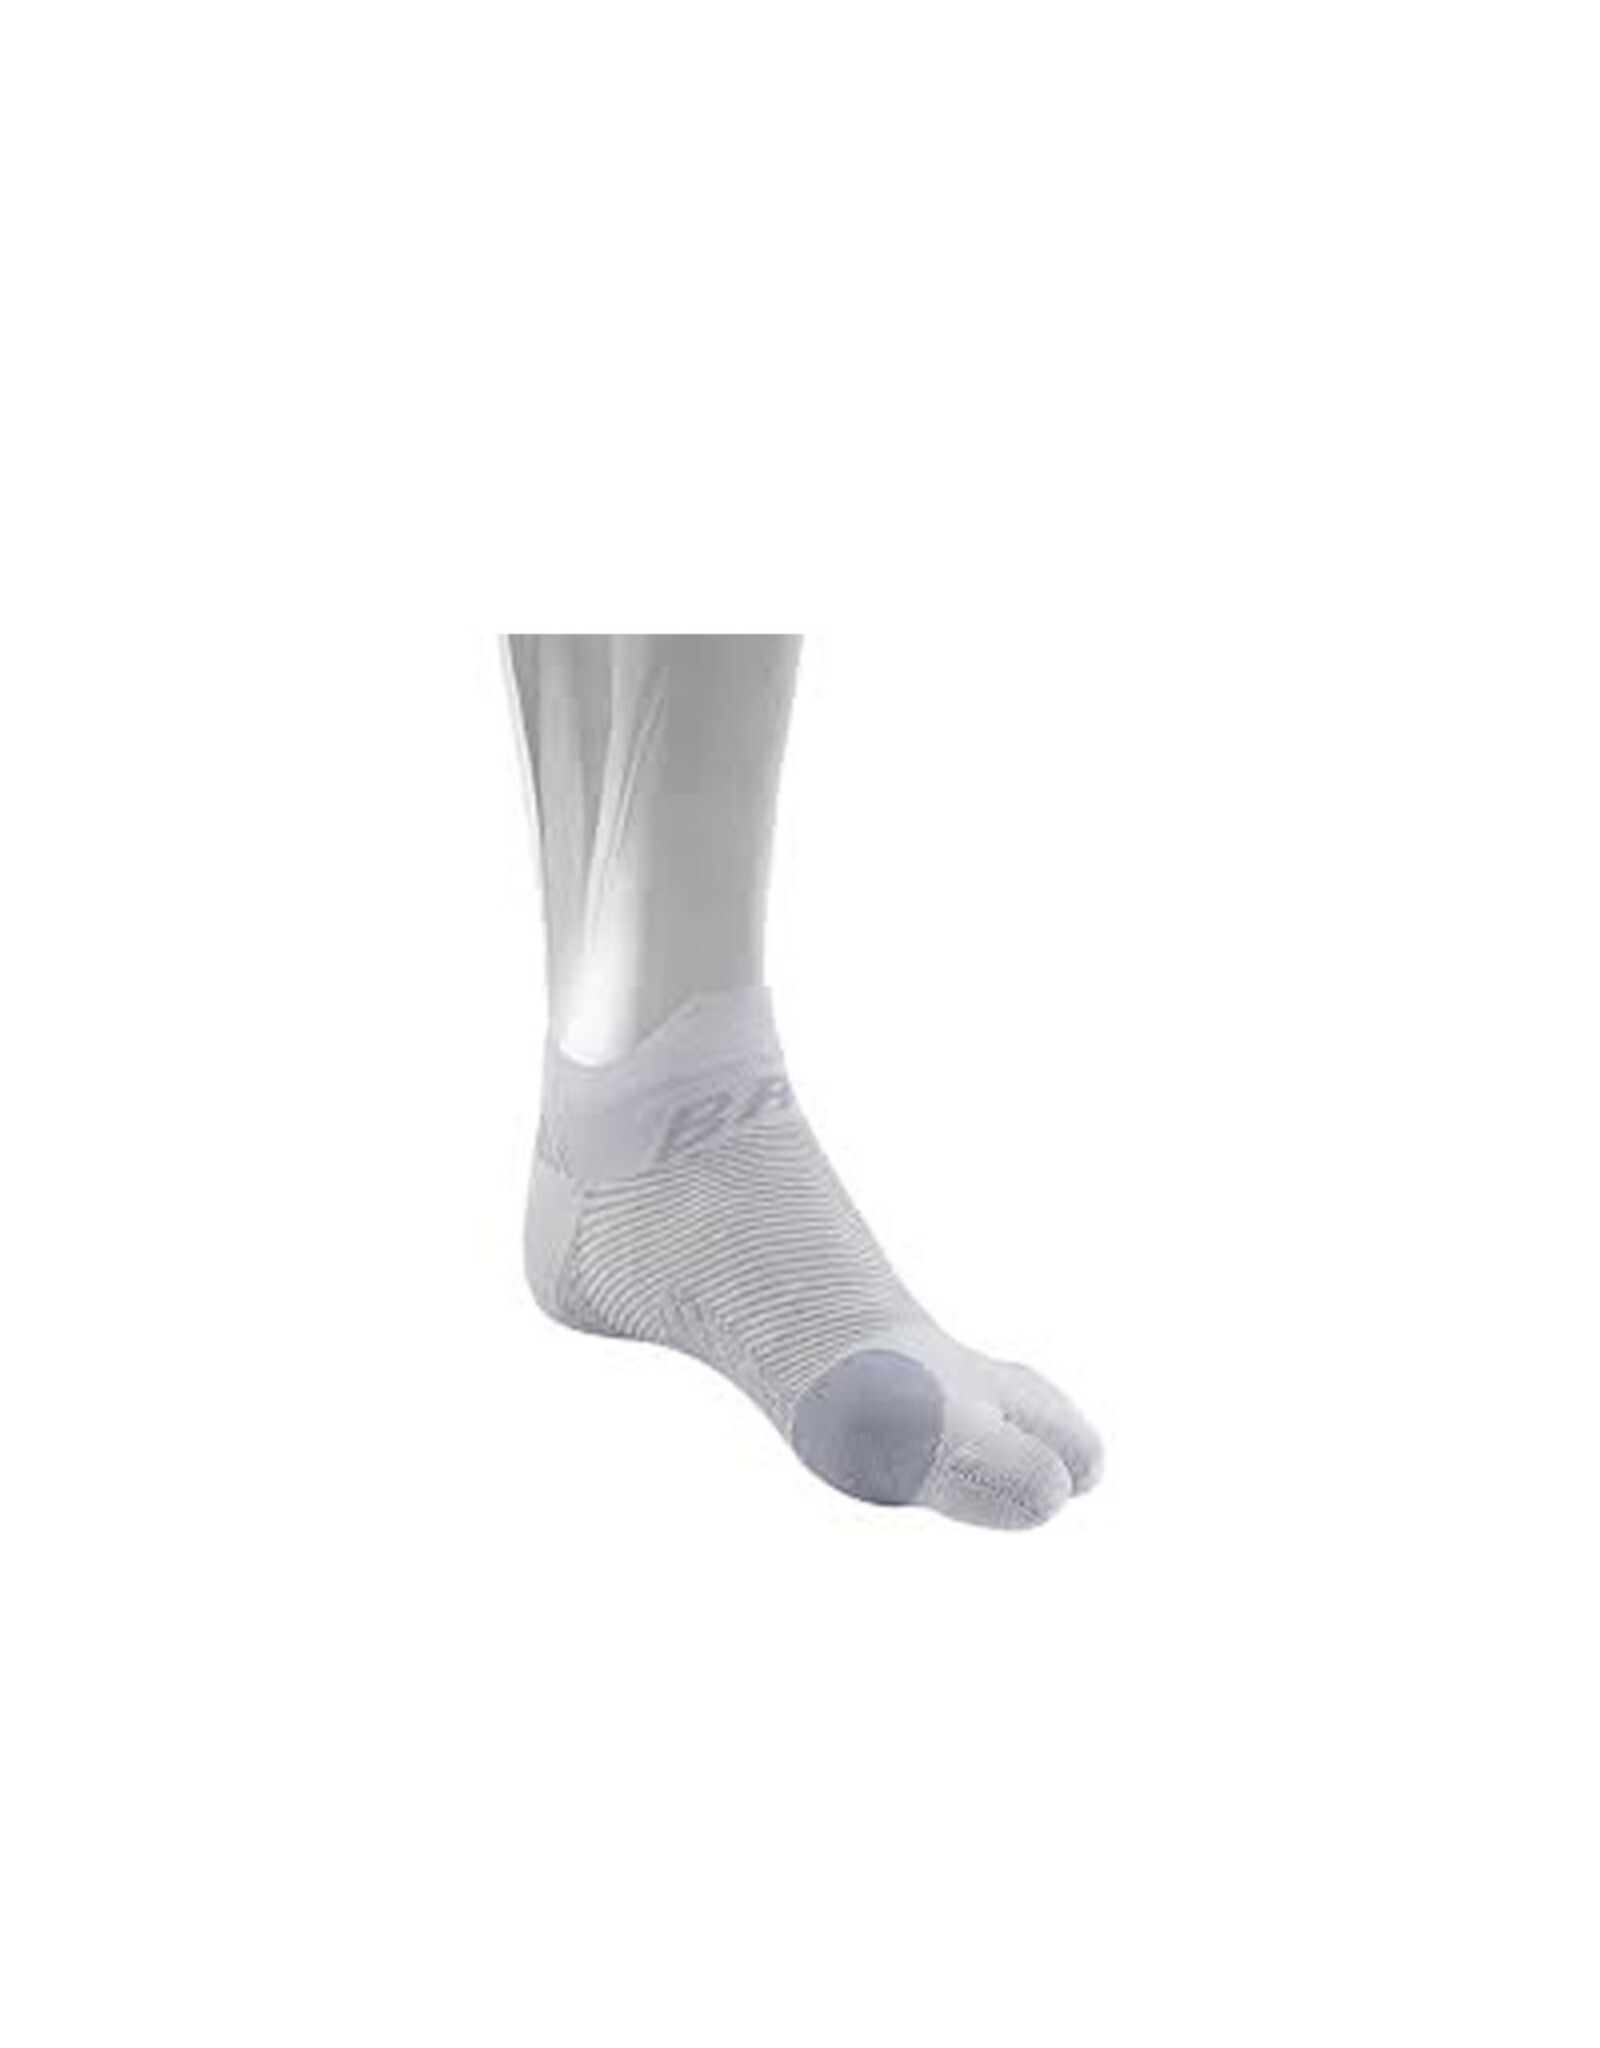 OS1ST BR4 BUNION RELIEF SOCK